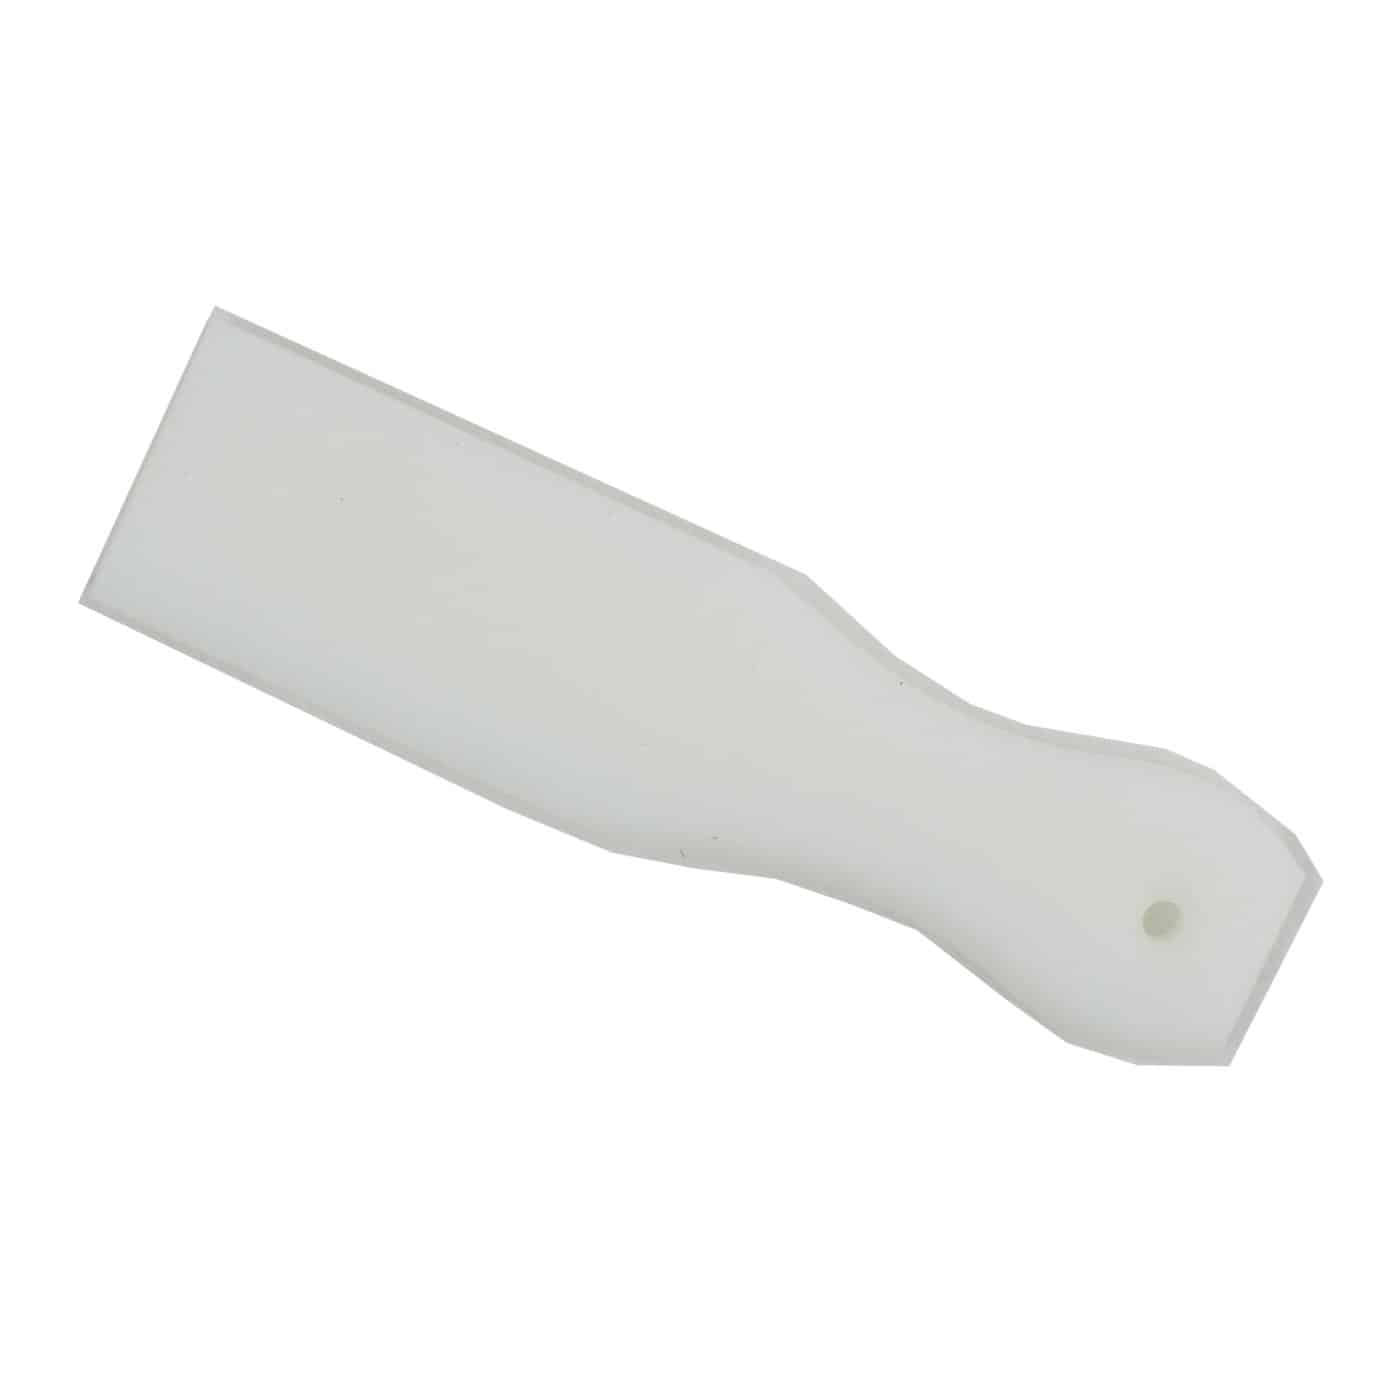 Re-Mov Adhesive & Silicone Remover - PipeKnife Caulking Tools